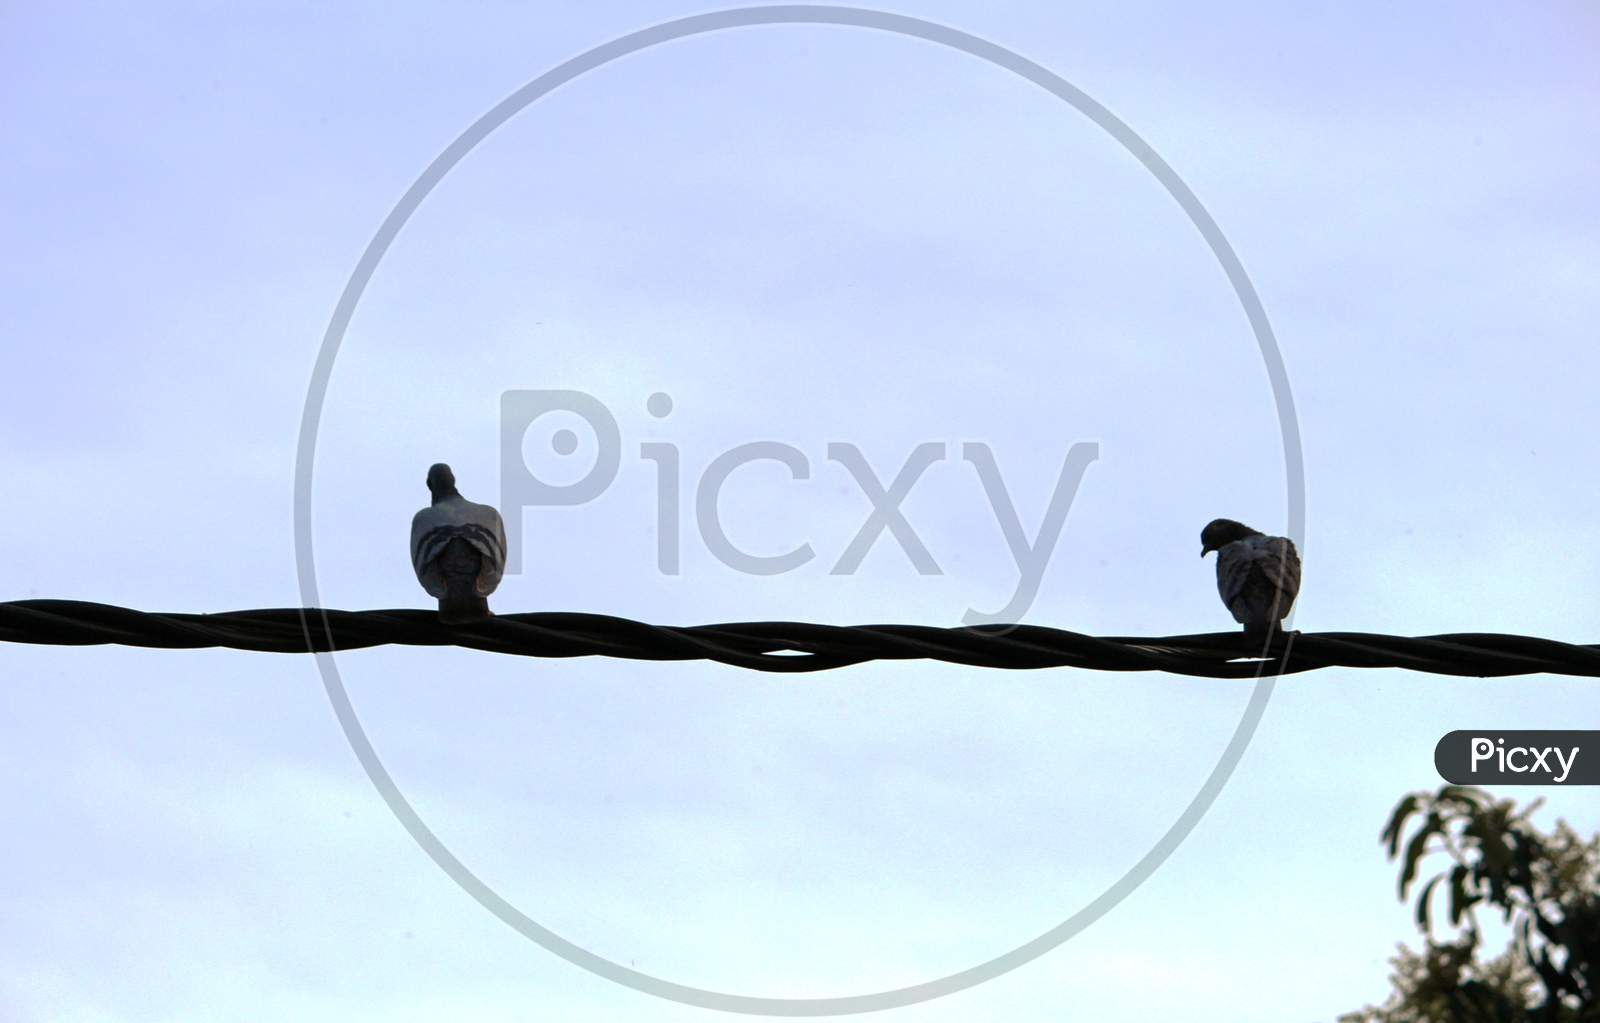 a pair of pigeons perched on a cable wire